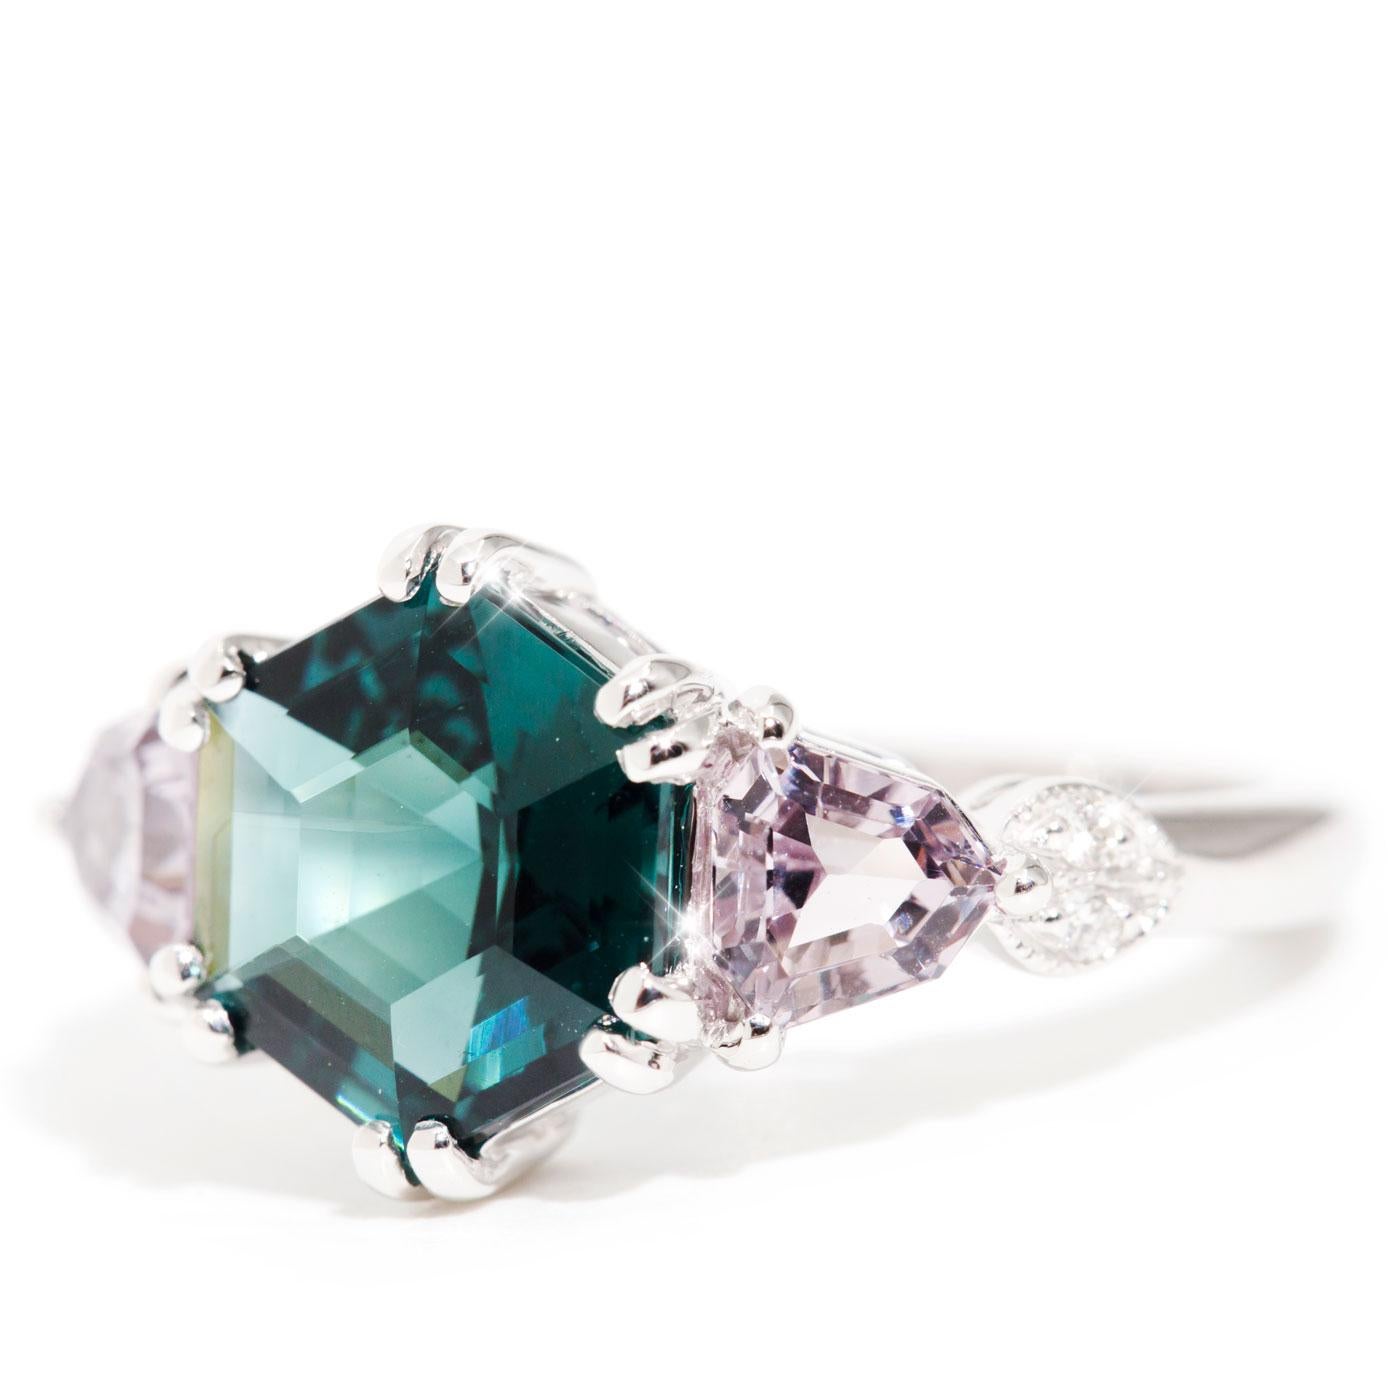 2.46 Carat Hexagon Teal Tourmaline and Spinel 18 Carat White Gold Cluster Ring 7